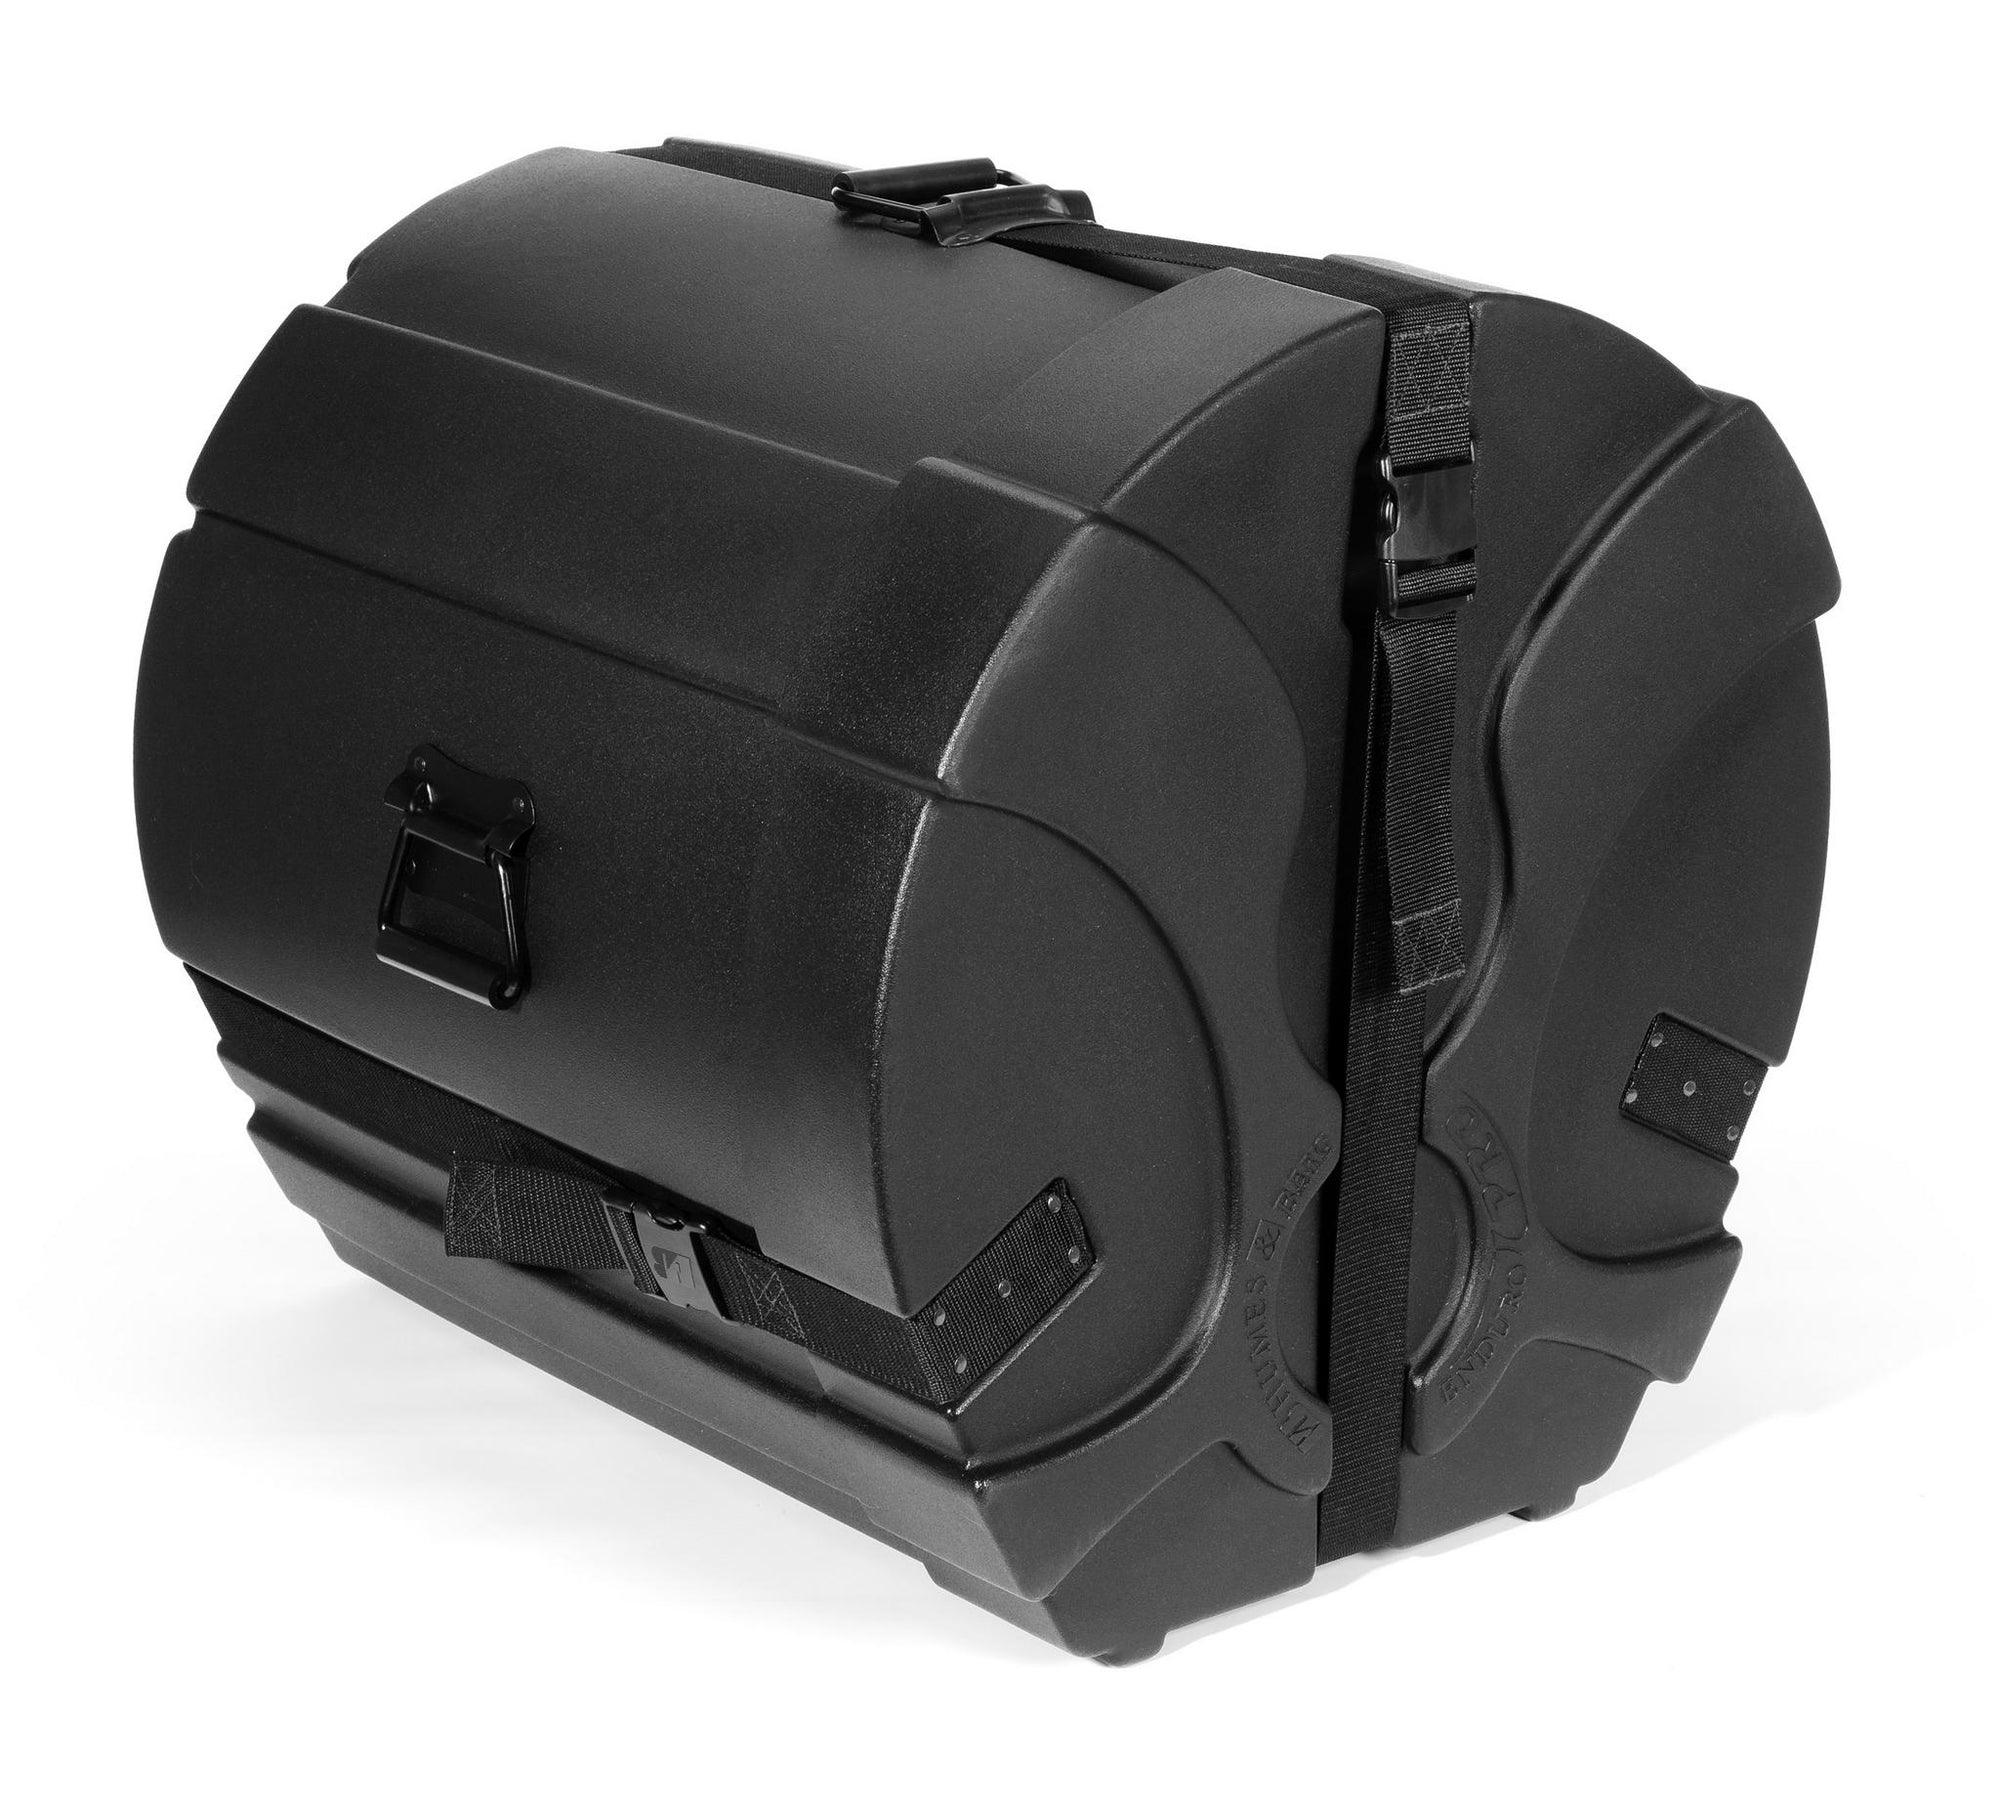 H&B Enduro Pro 12 x 24 Inches Bass Drum Case - Black with Pro Lining